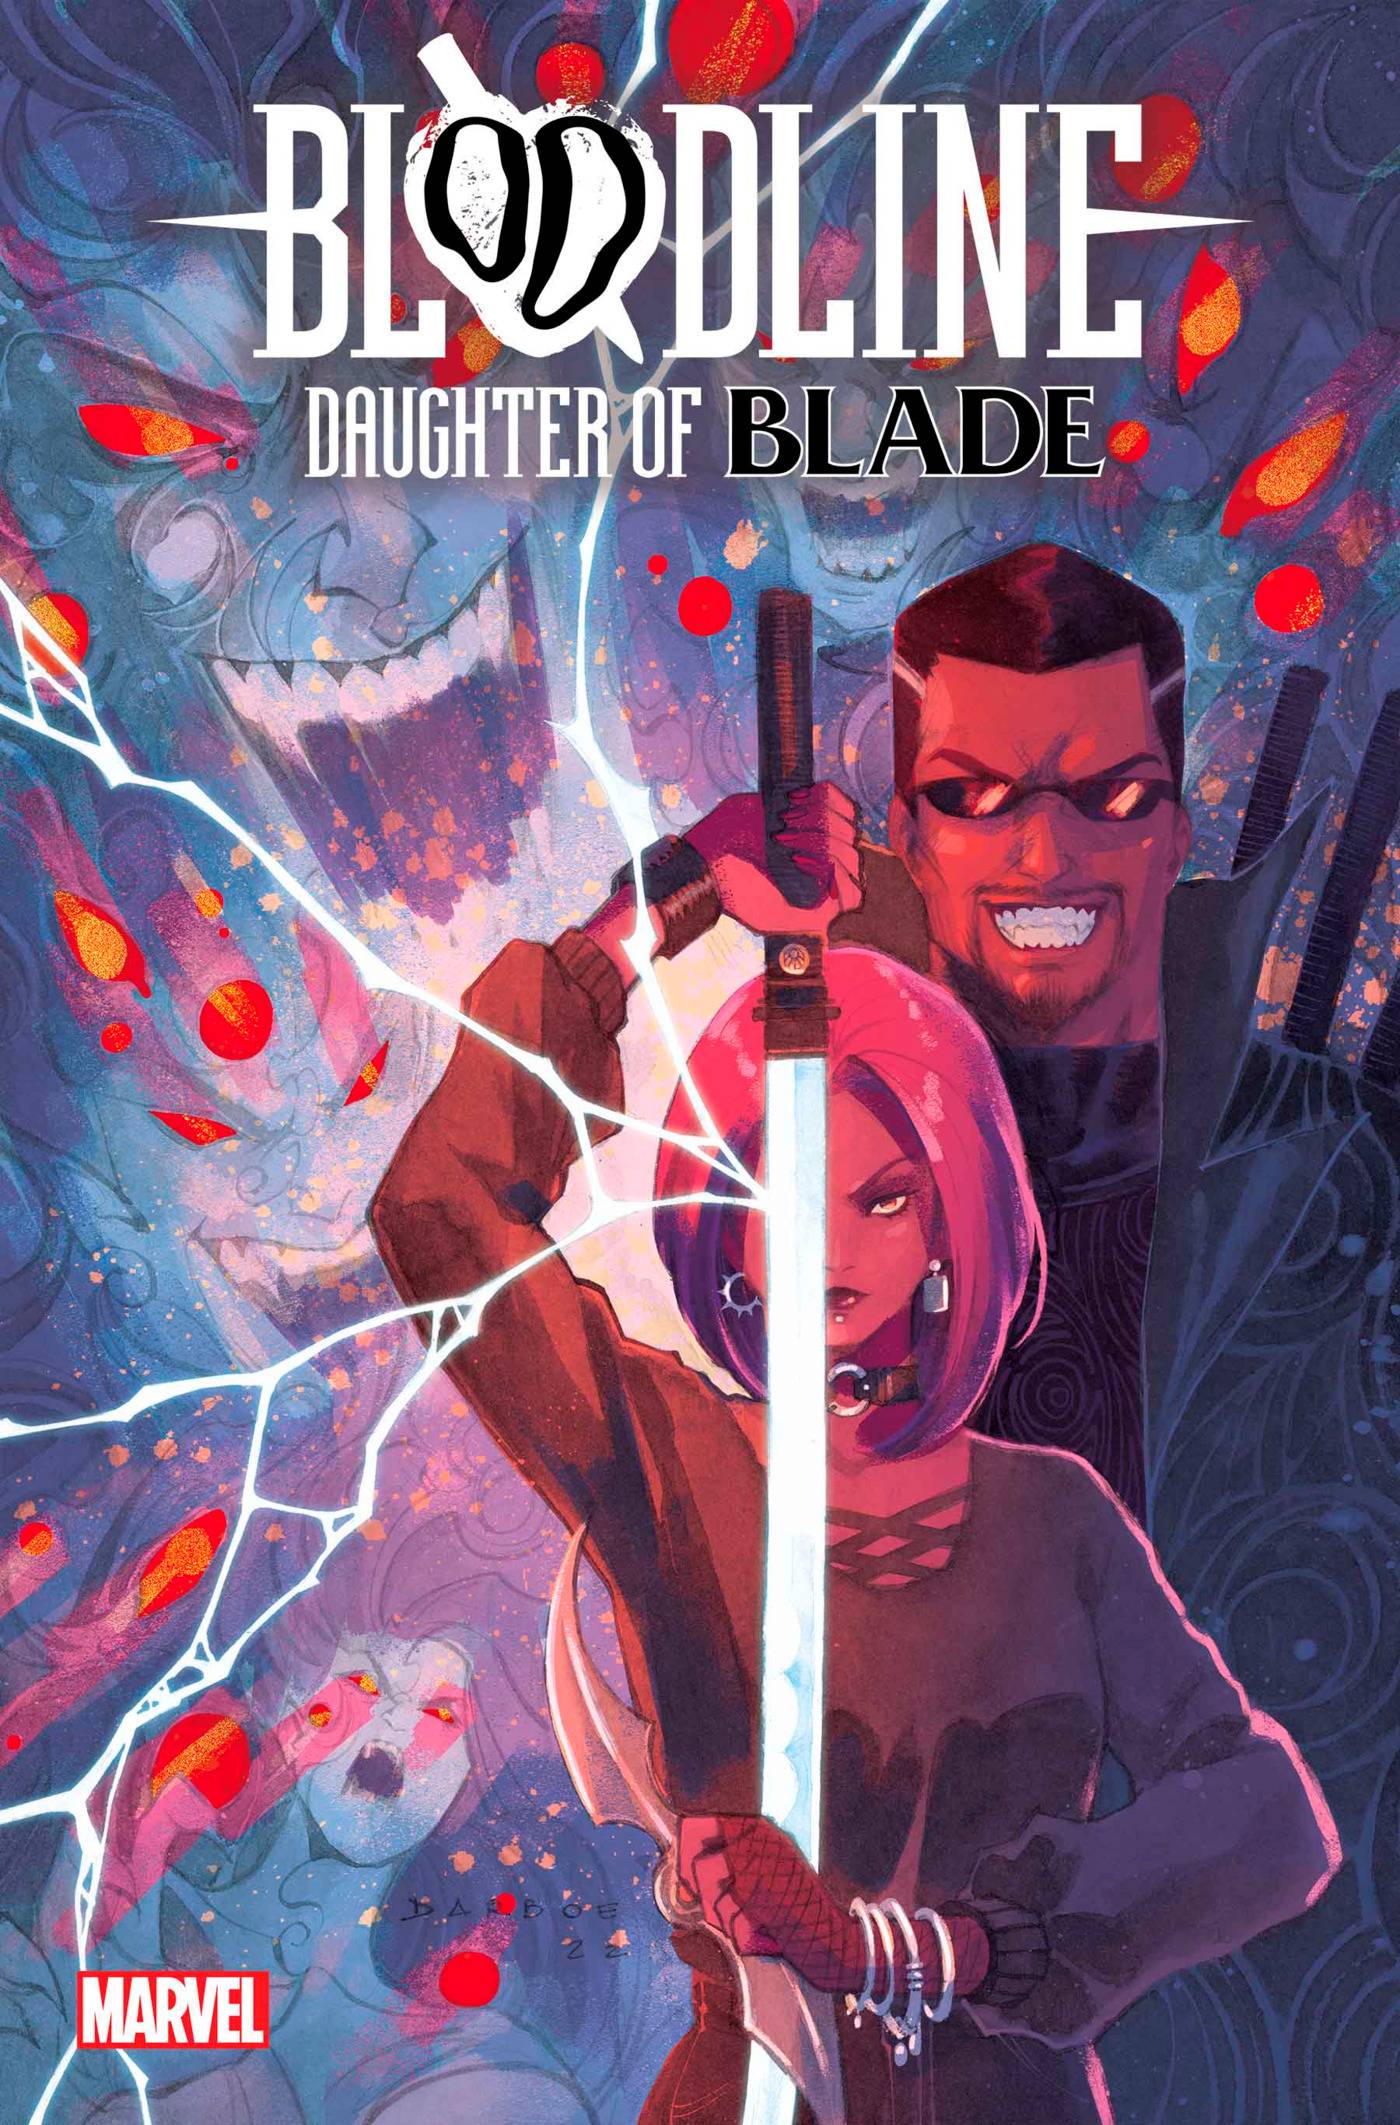 Brielle Brooks takes up her father's sword on Karen S. Darboe and Cristiane Peter's cover to Bloodline: Daughter of Blade Vol. 1 #1 (2023), Marvel Comics via Previews World